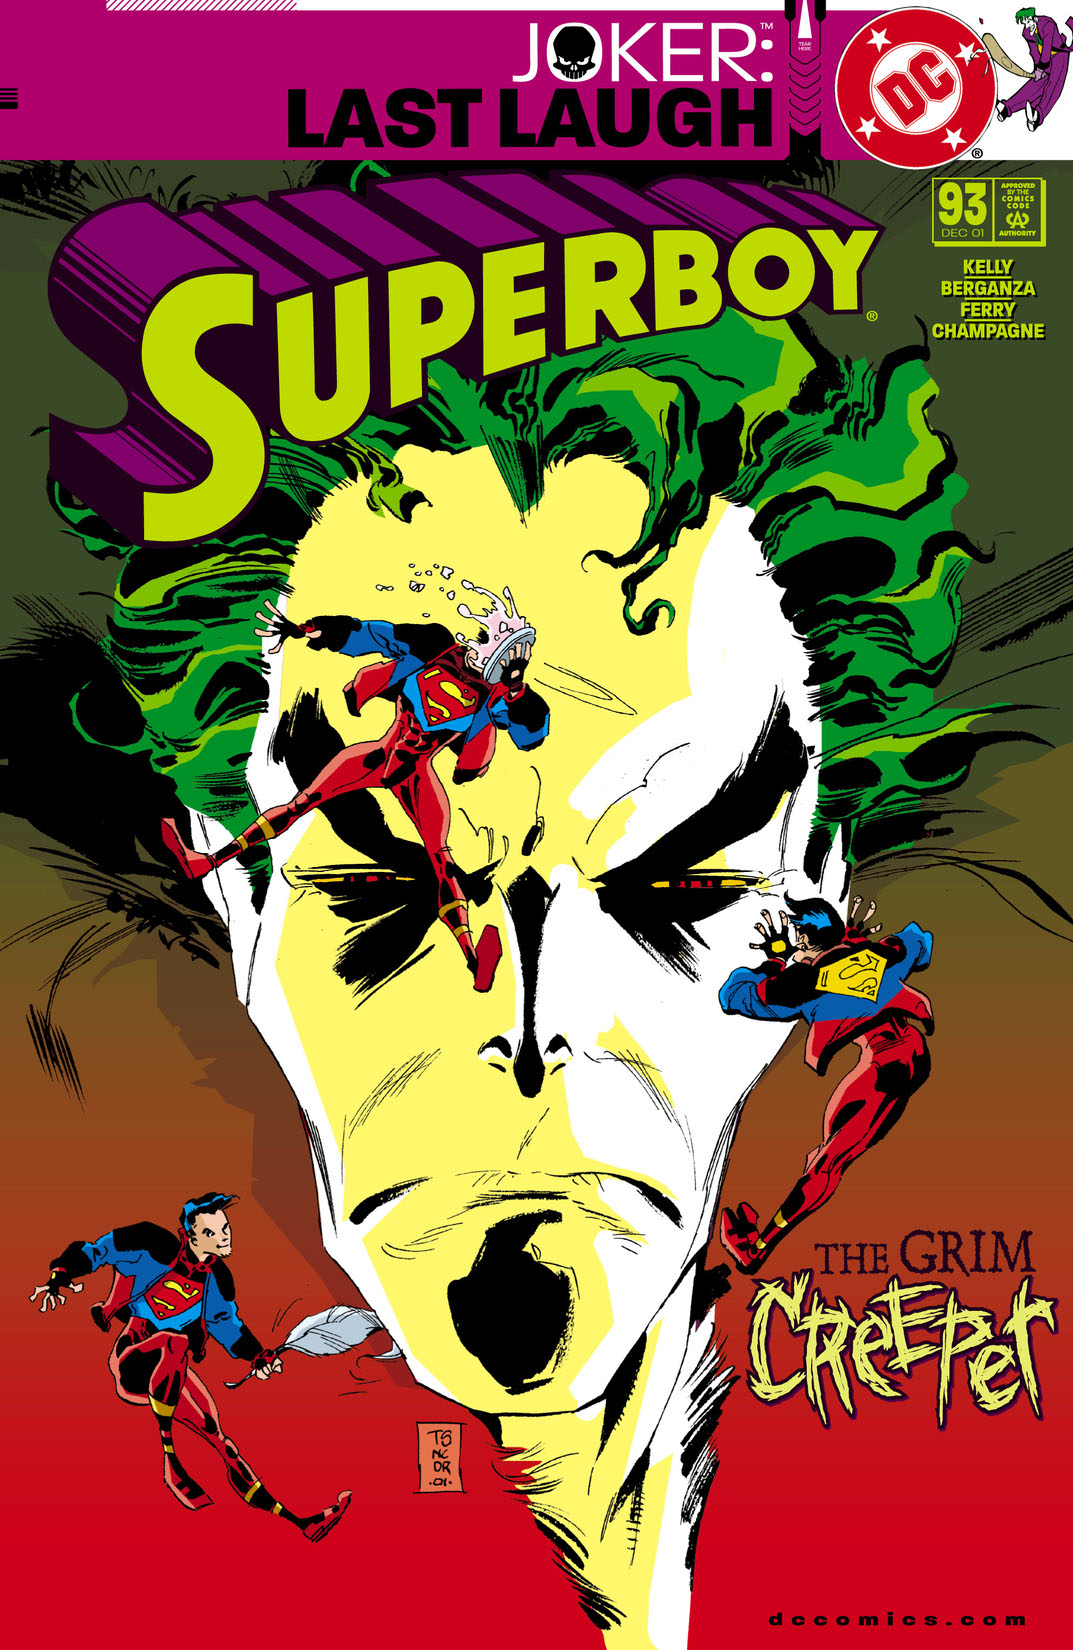 Superboy (1993-) #93 preview images